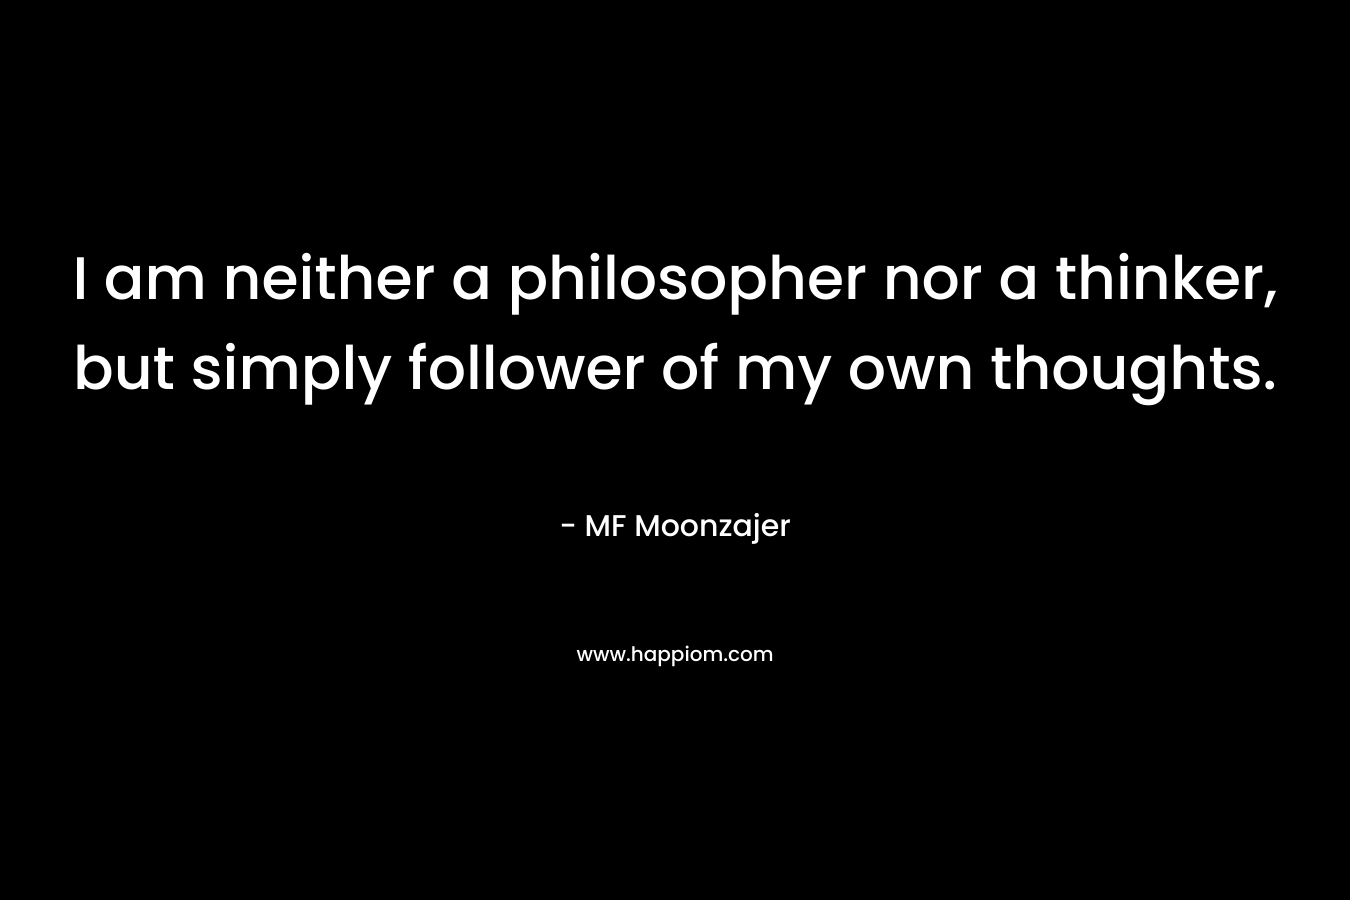 I am neither a philosopher nor a thinker, but simply follower of my own thoughts.